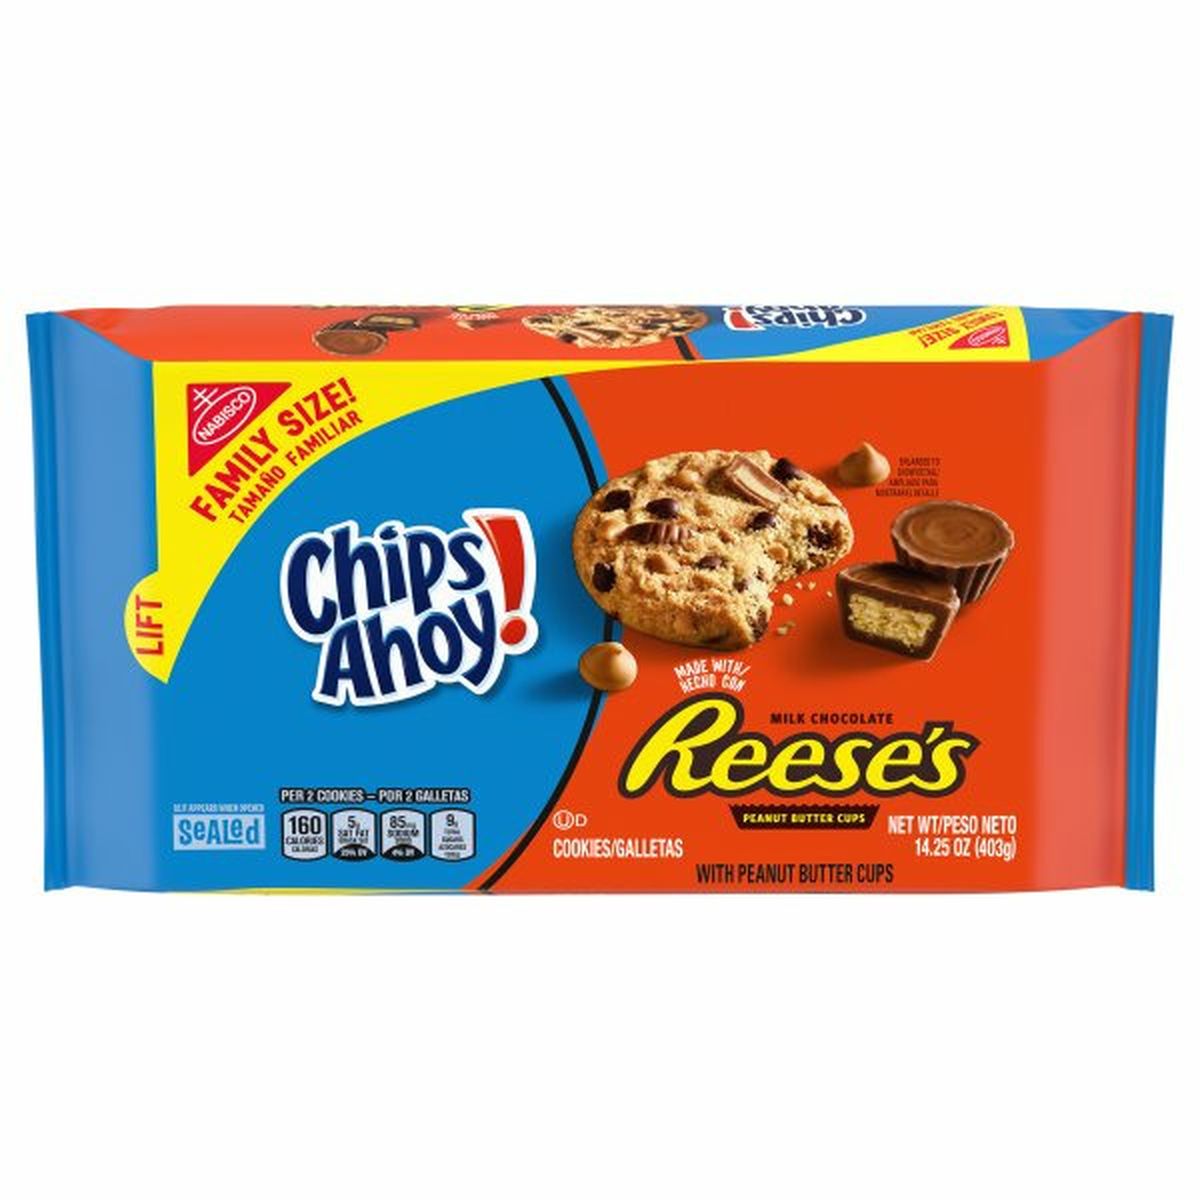 Calories in Chips Ahoy! Reese's Cookies, with Reese's Milk Chocolate Peanut Butter Cups, Family Size